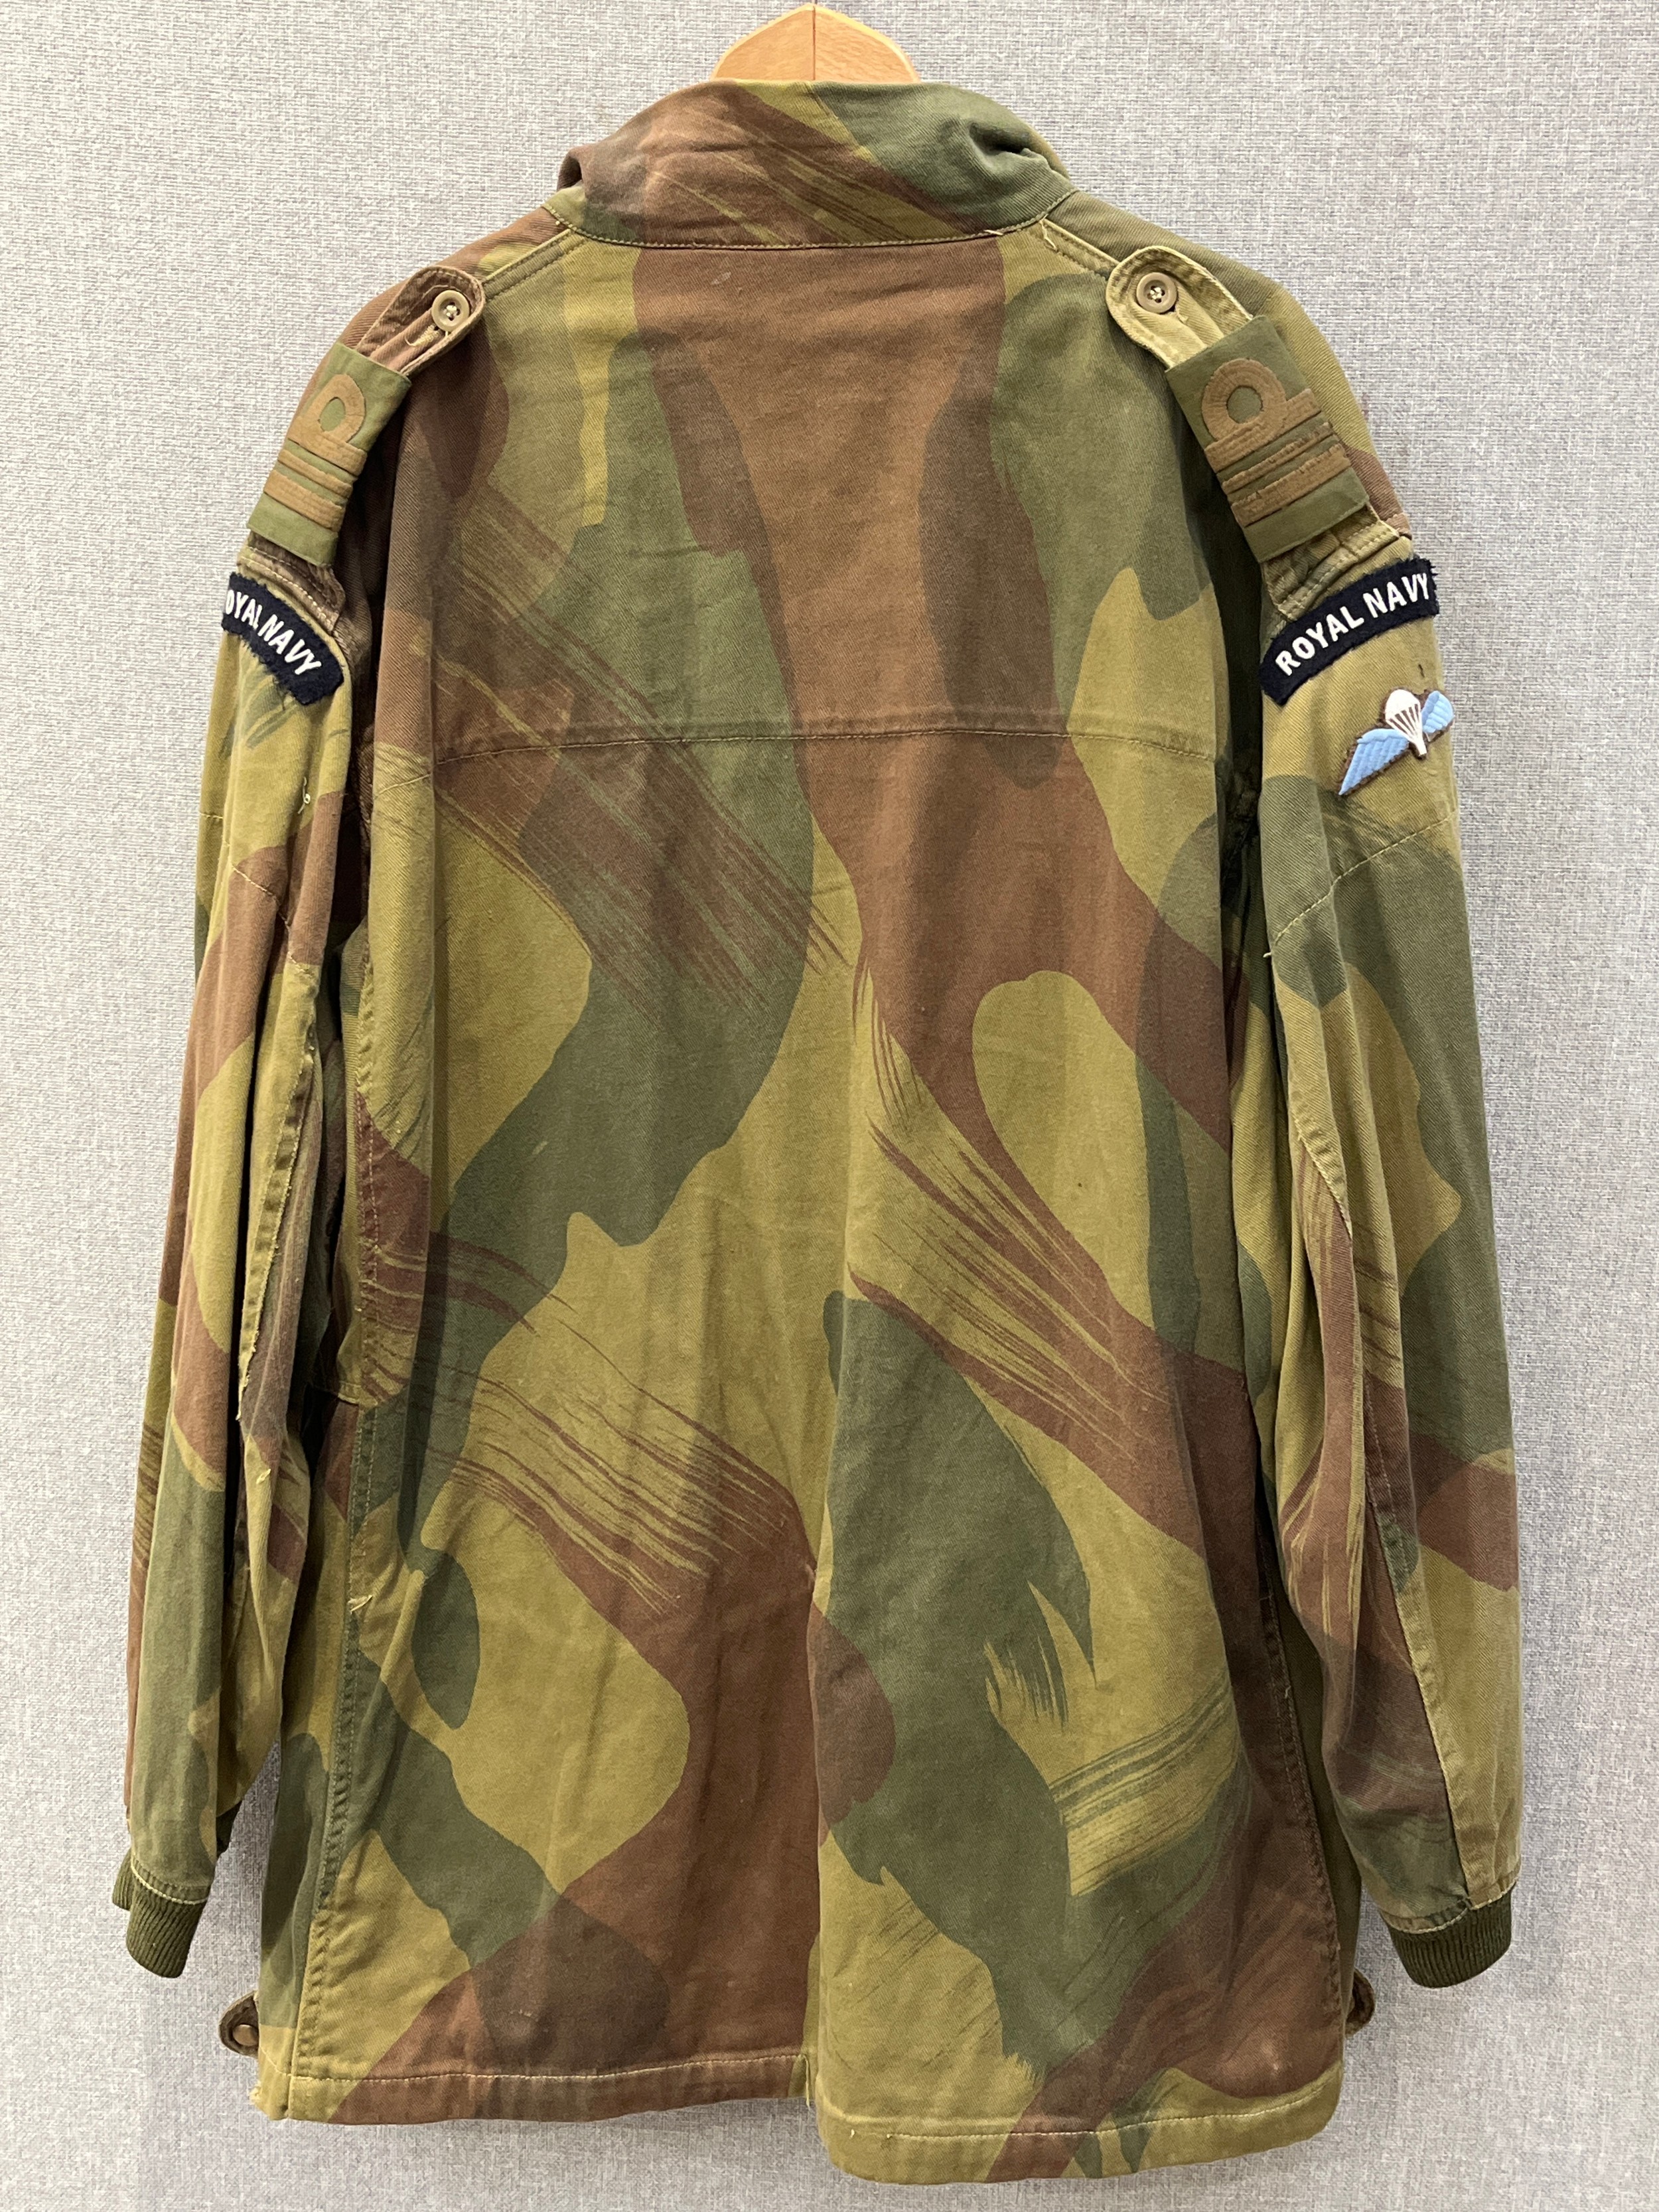 A WWII Airborne Division Denison Smock by John Gordon & Co., dated 1944, size 7, half-zip, - Image 2 of 4